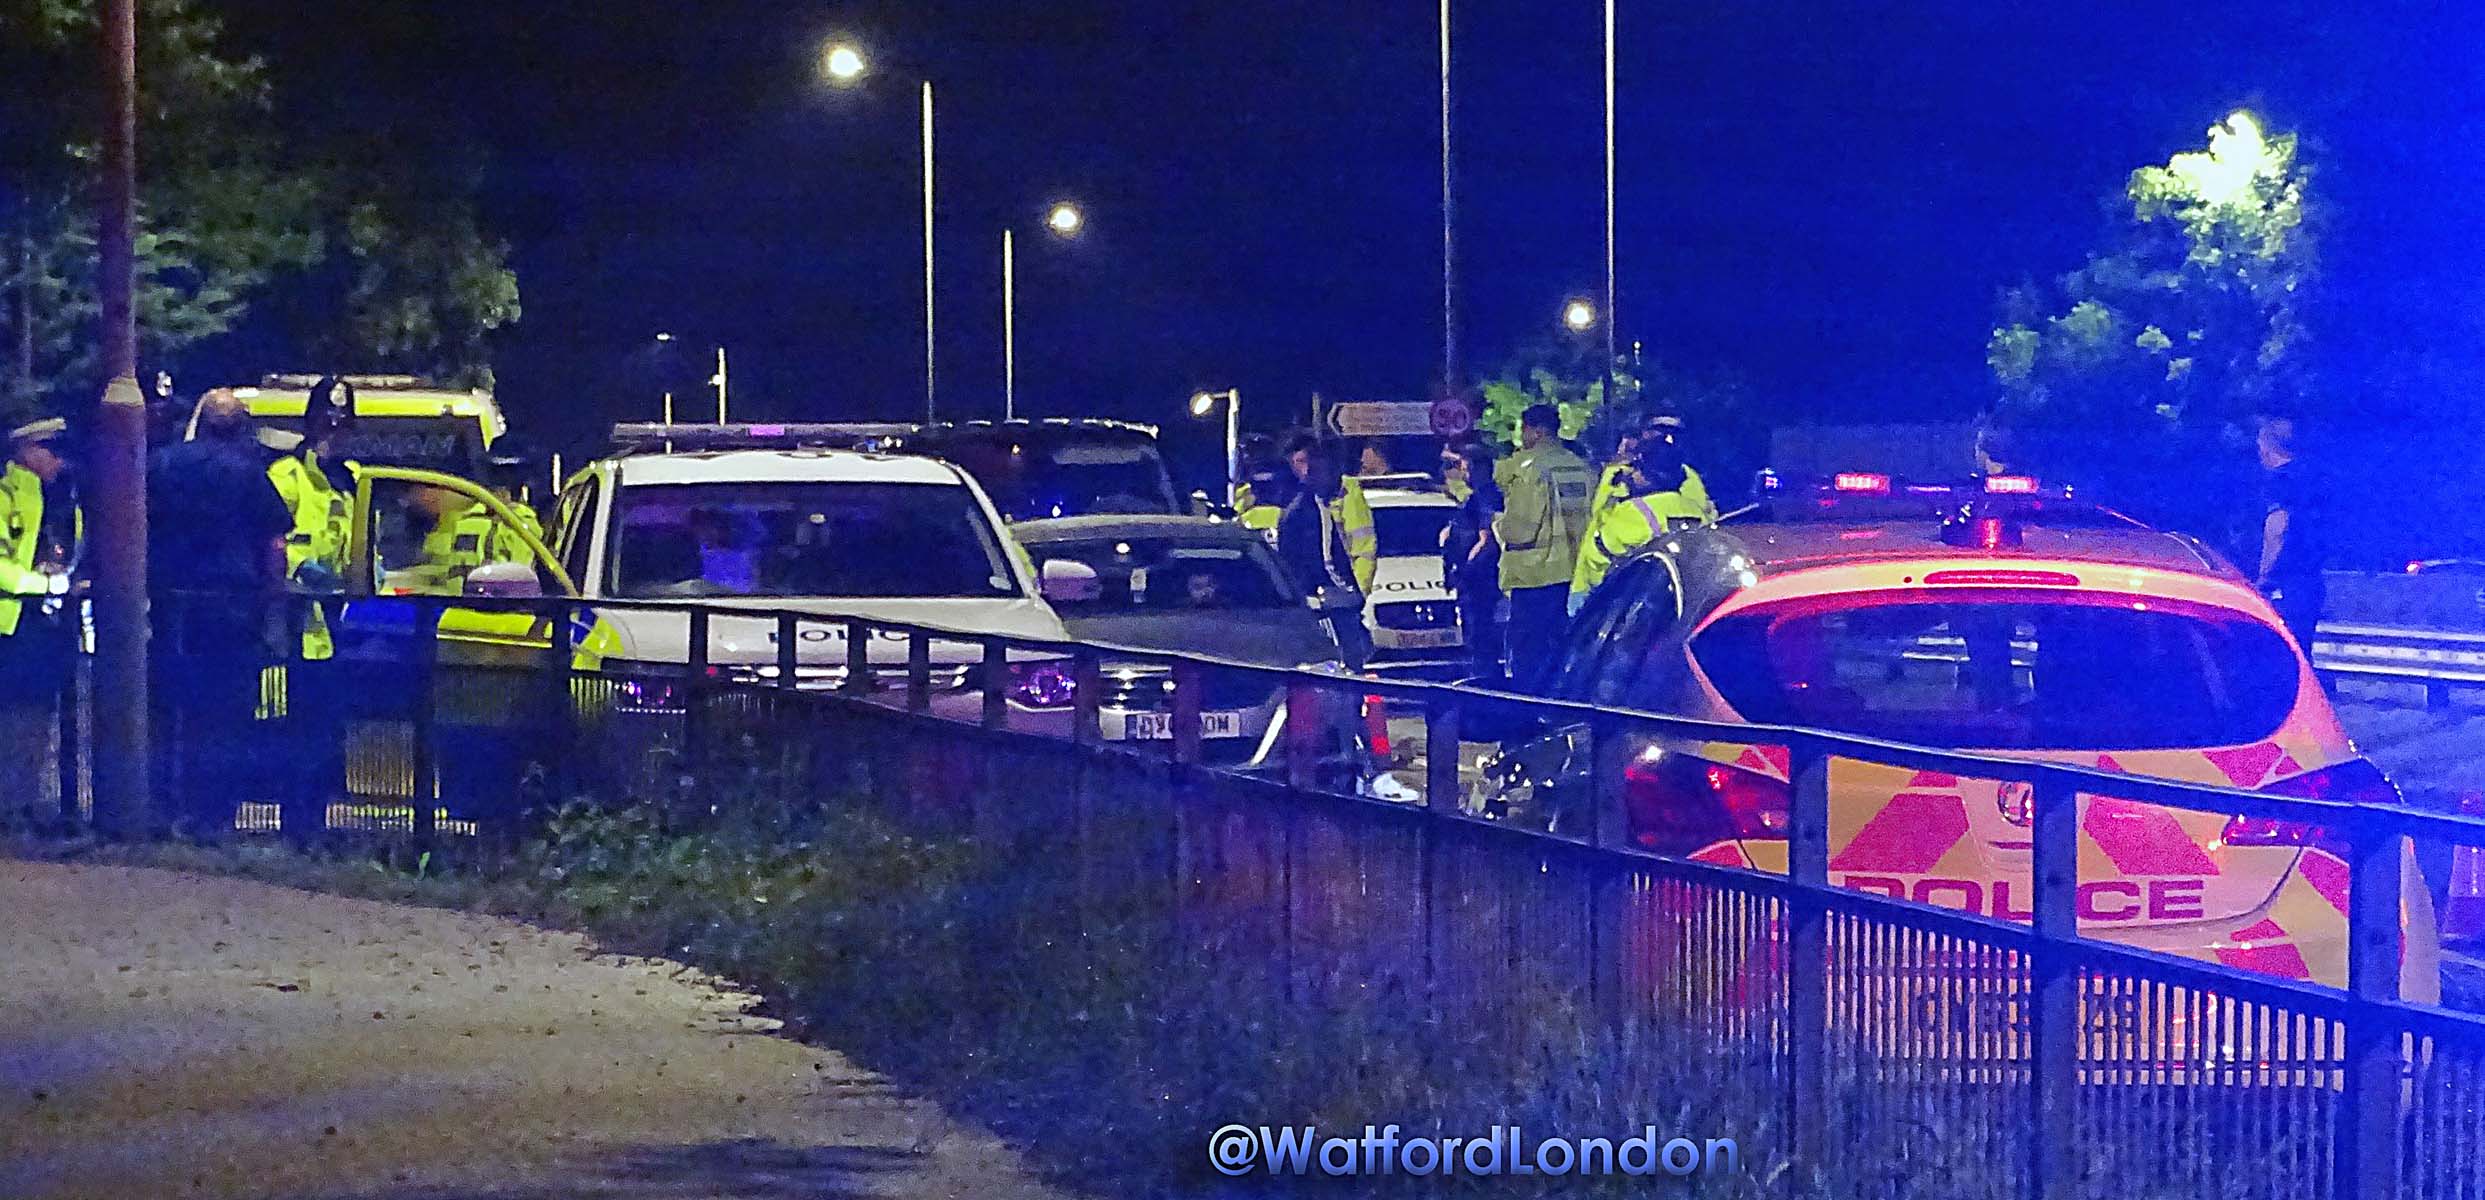 Watford Shooting - Two men have been charged with atempted murder and drugs offences